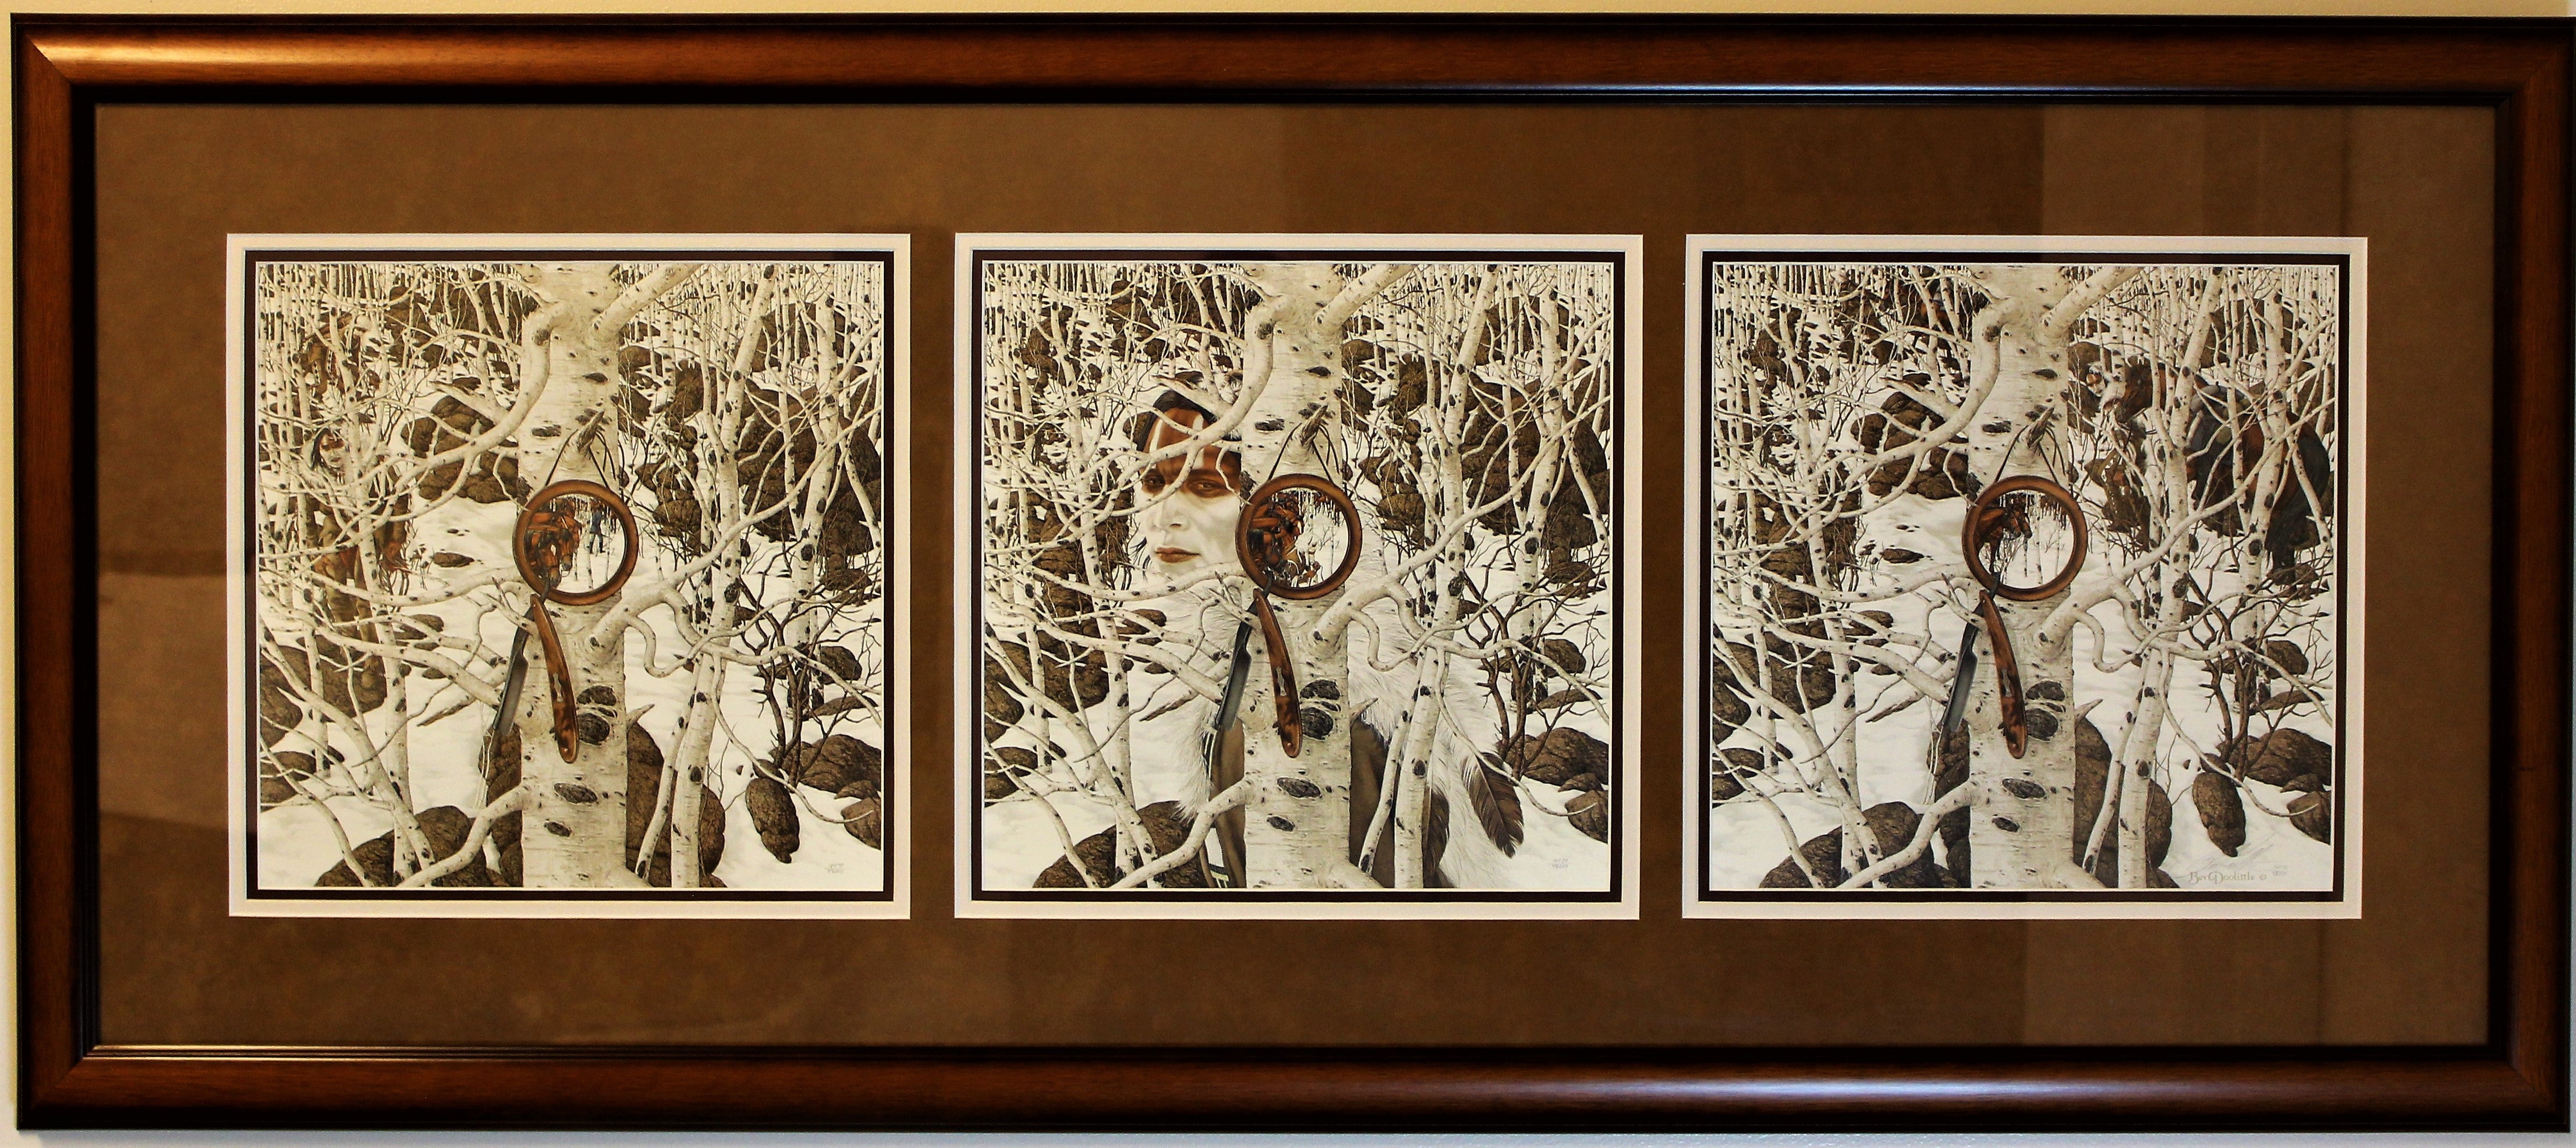 Two More Indian Horses Ltd. Ed Print by Bev Doolittle